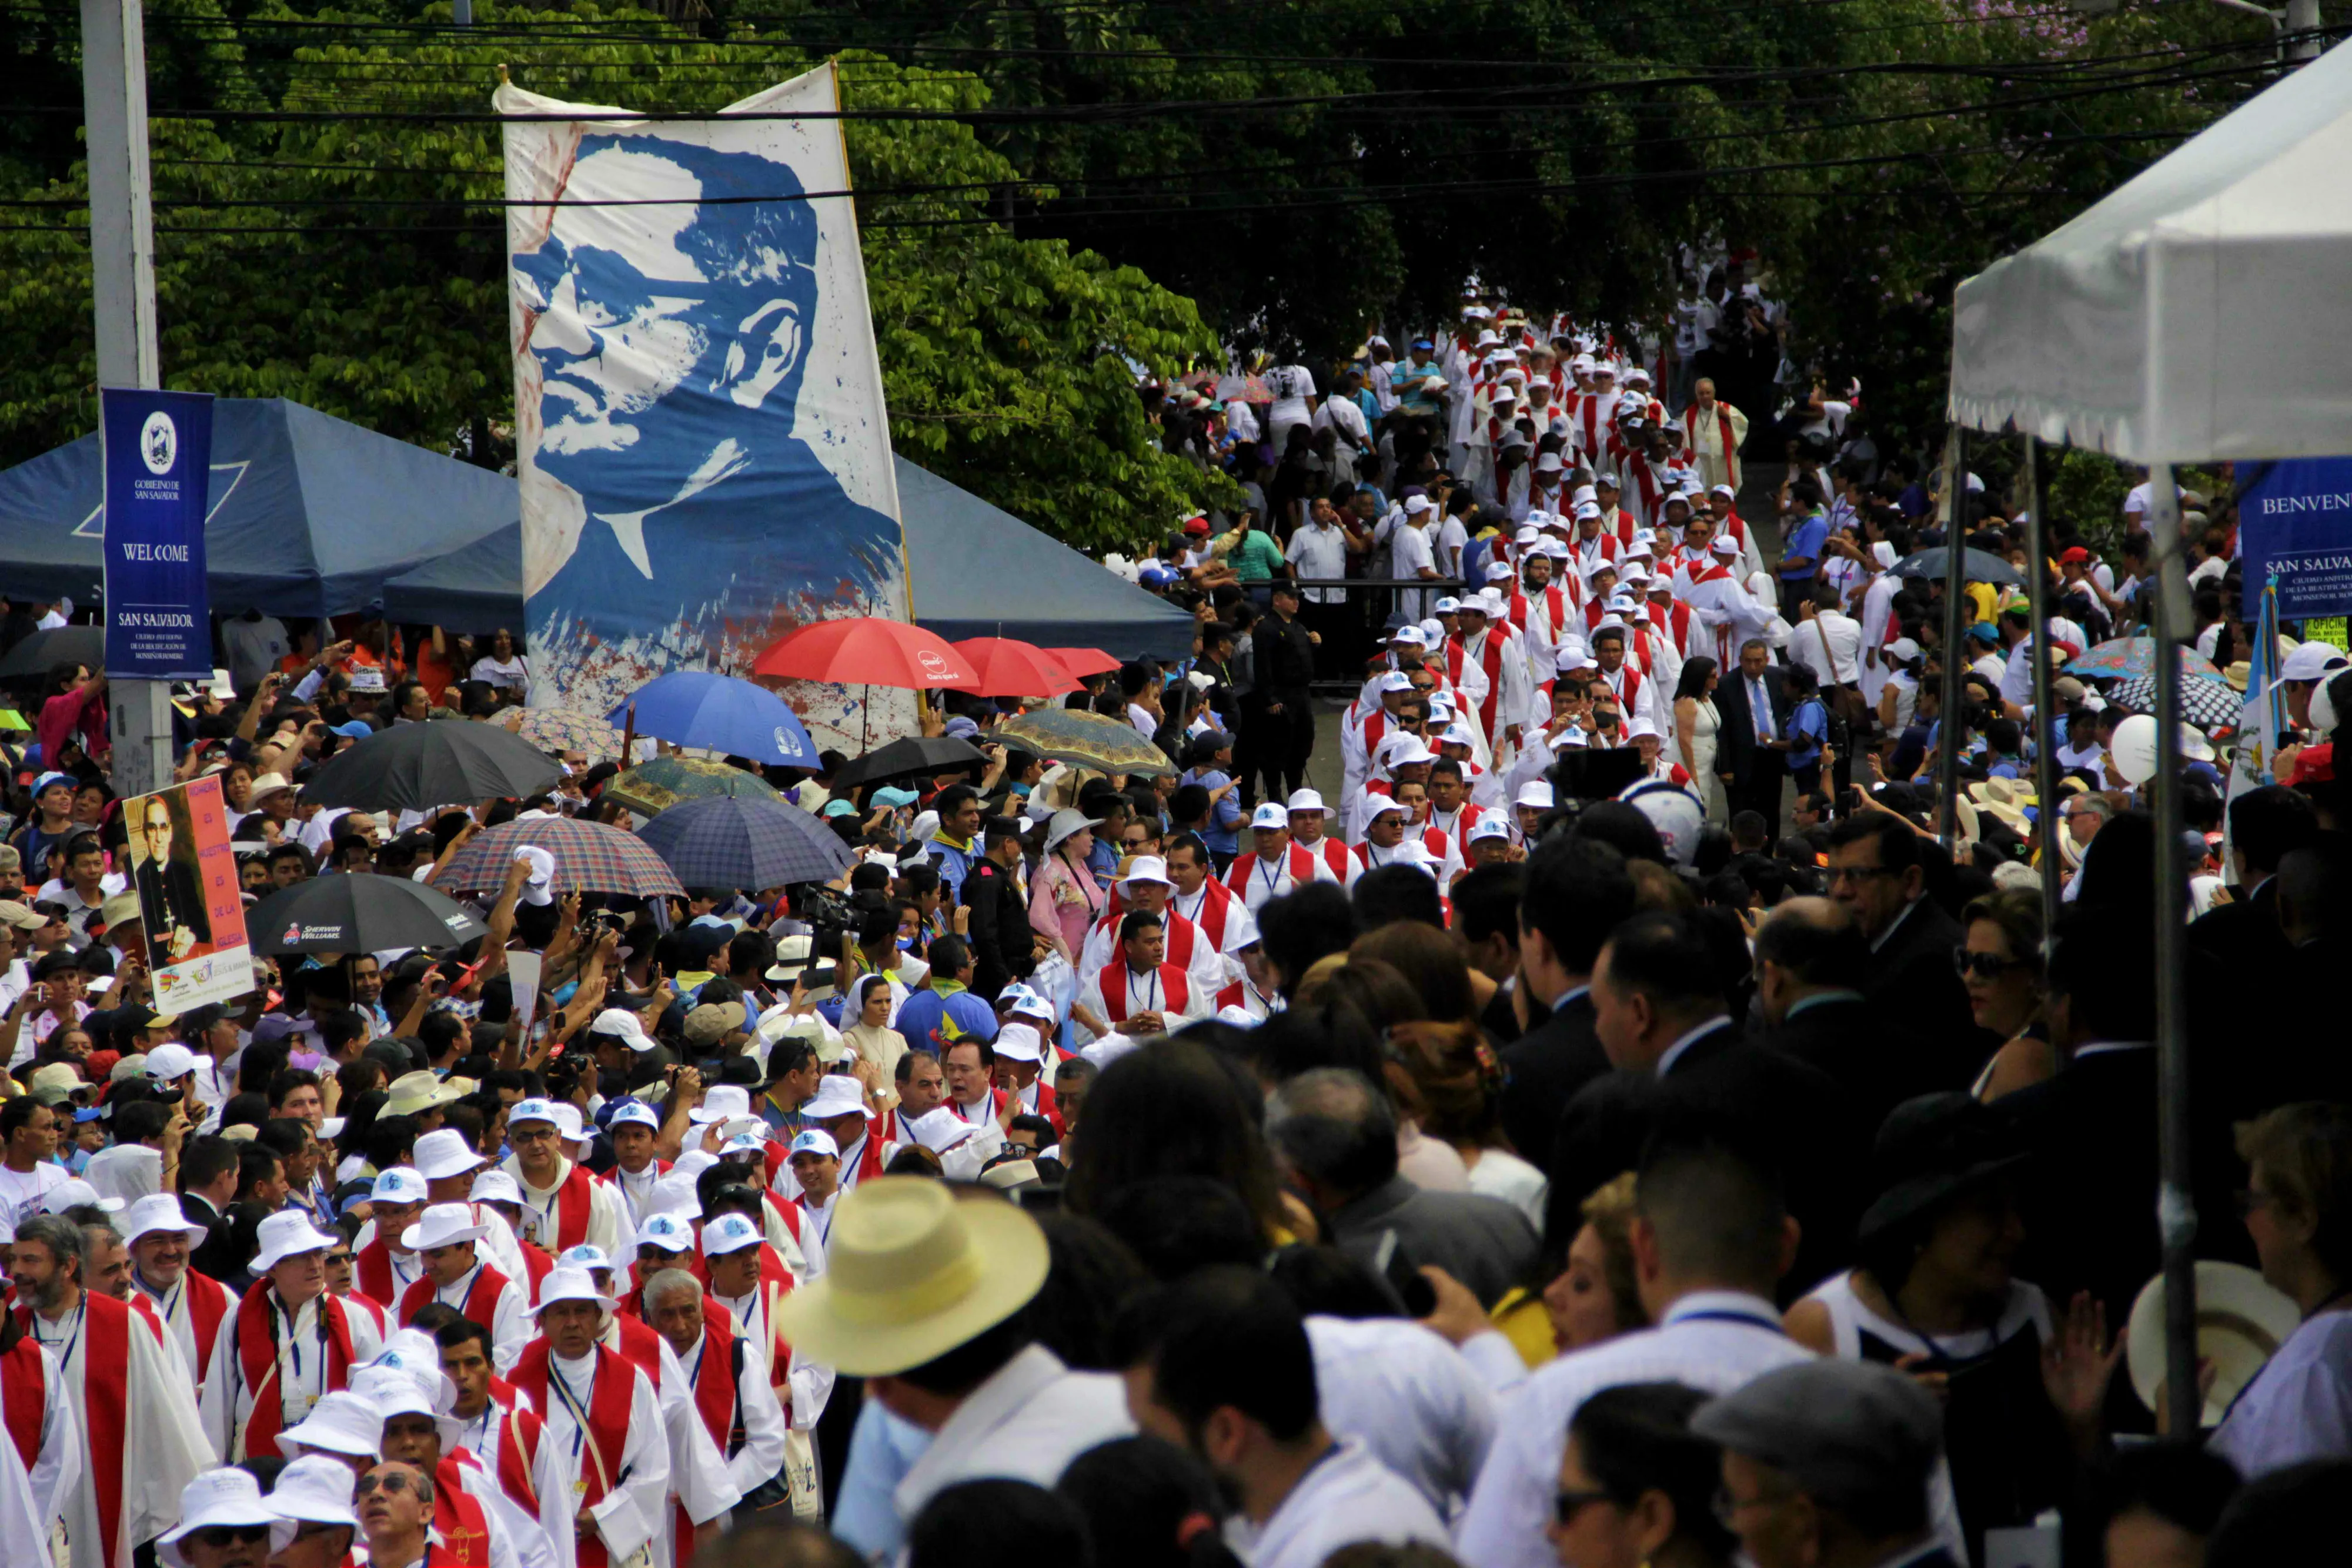 A procession in San Salvador for the beatification Mass of Oscar Romero. ?w=200&h=150